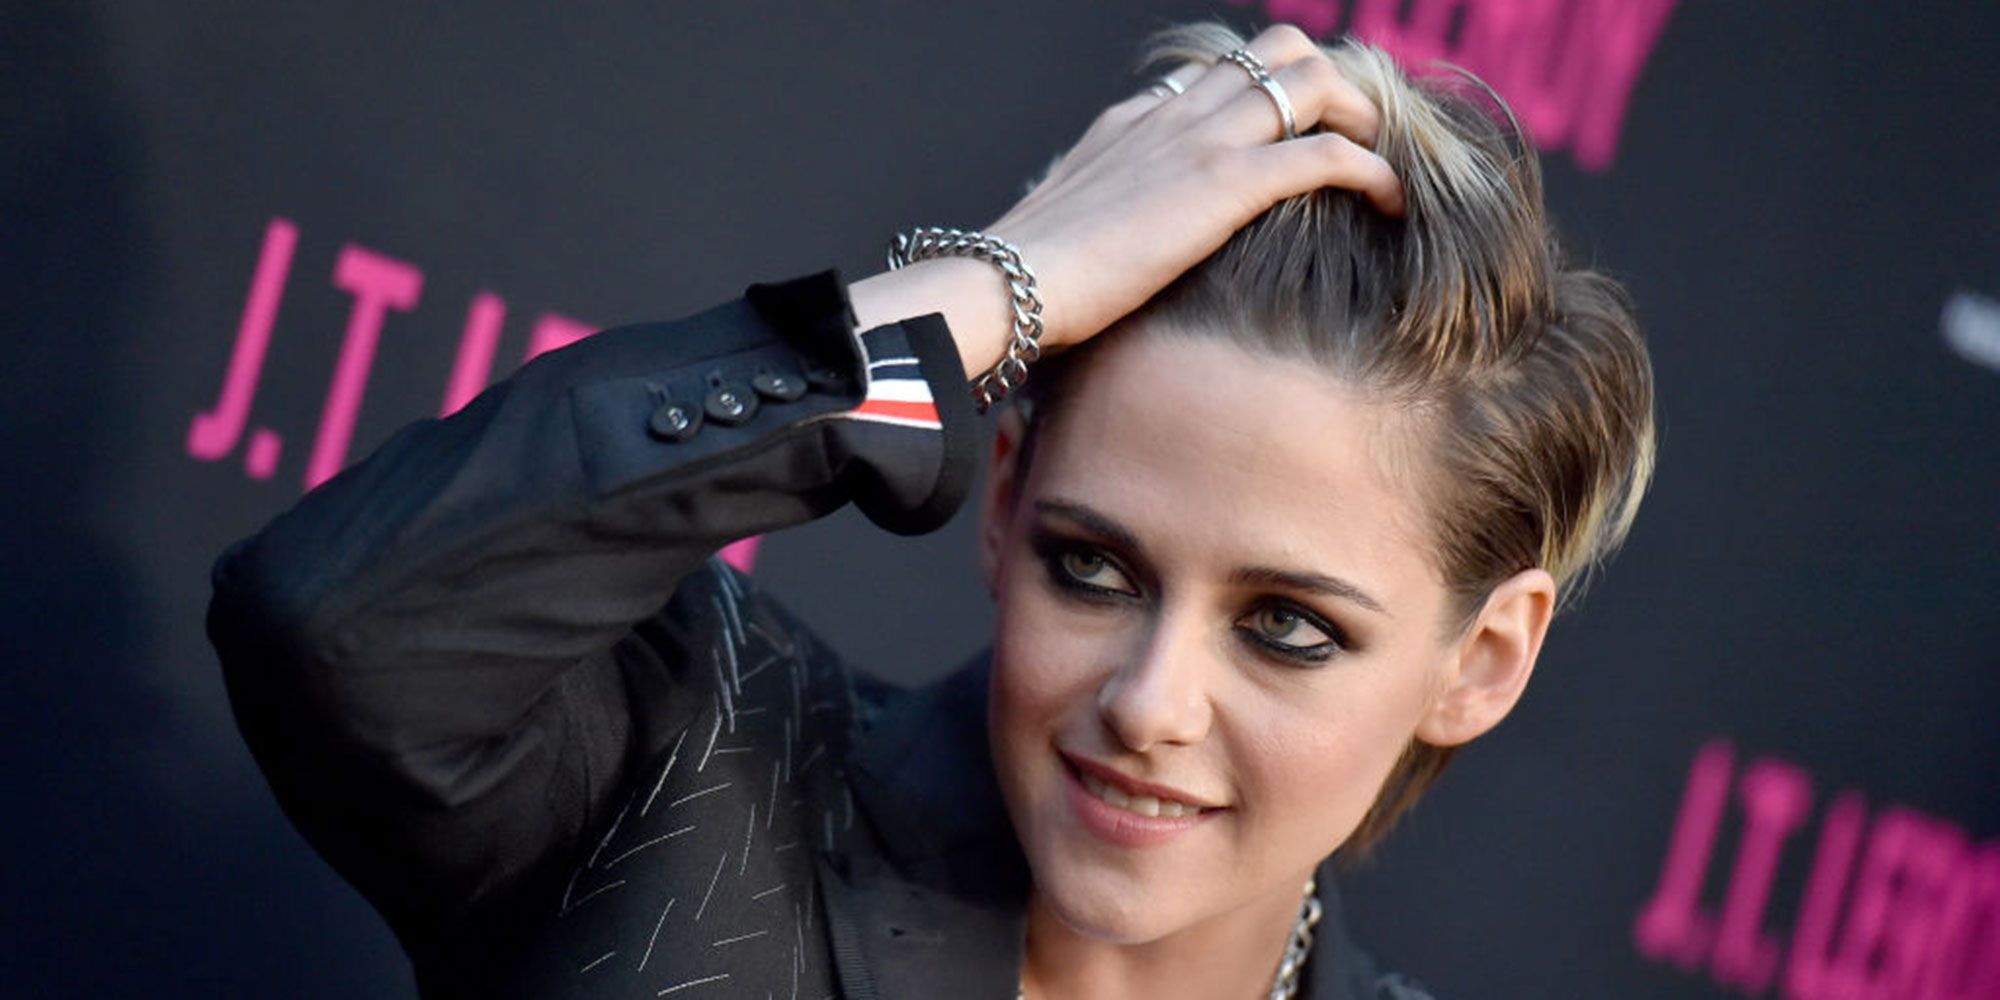 Kristen Stewart: her style elevated by Messika jewelry